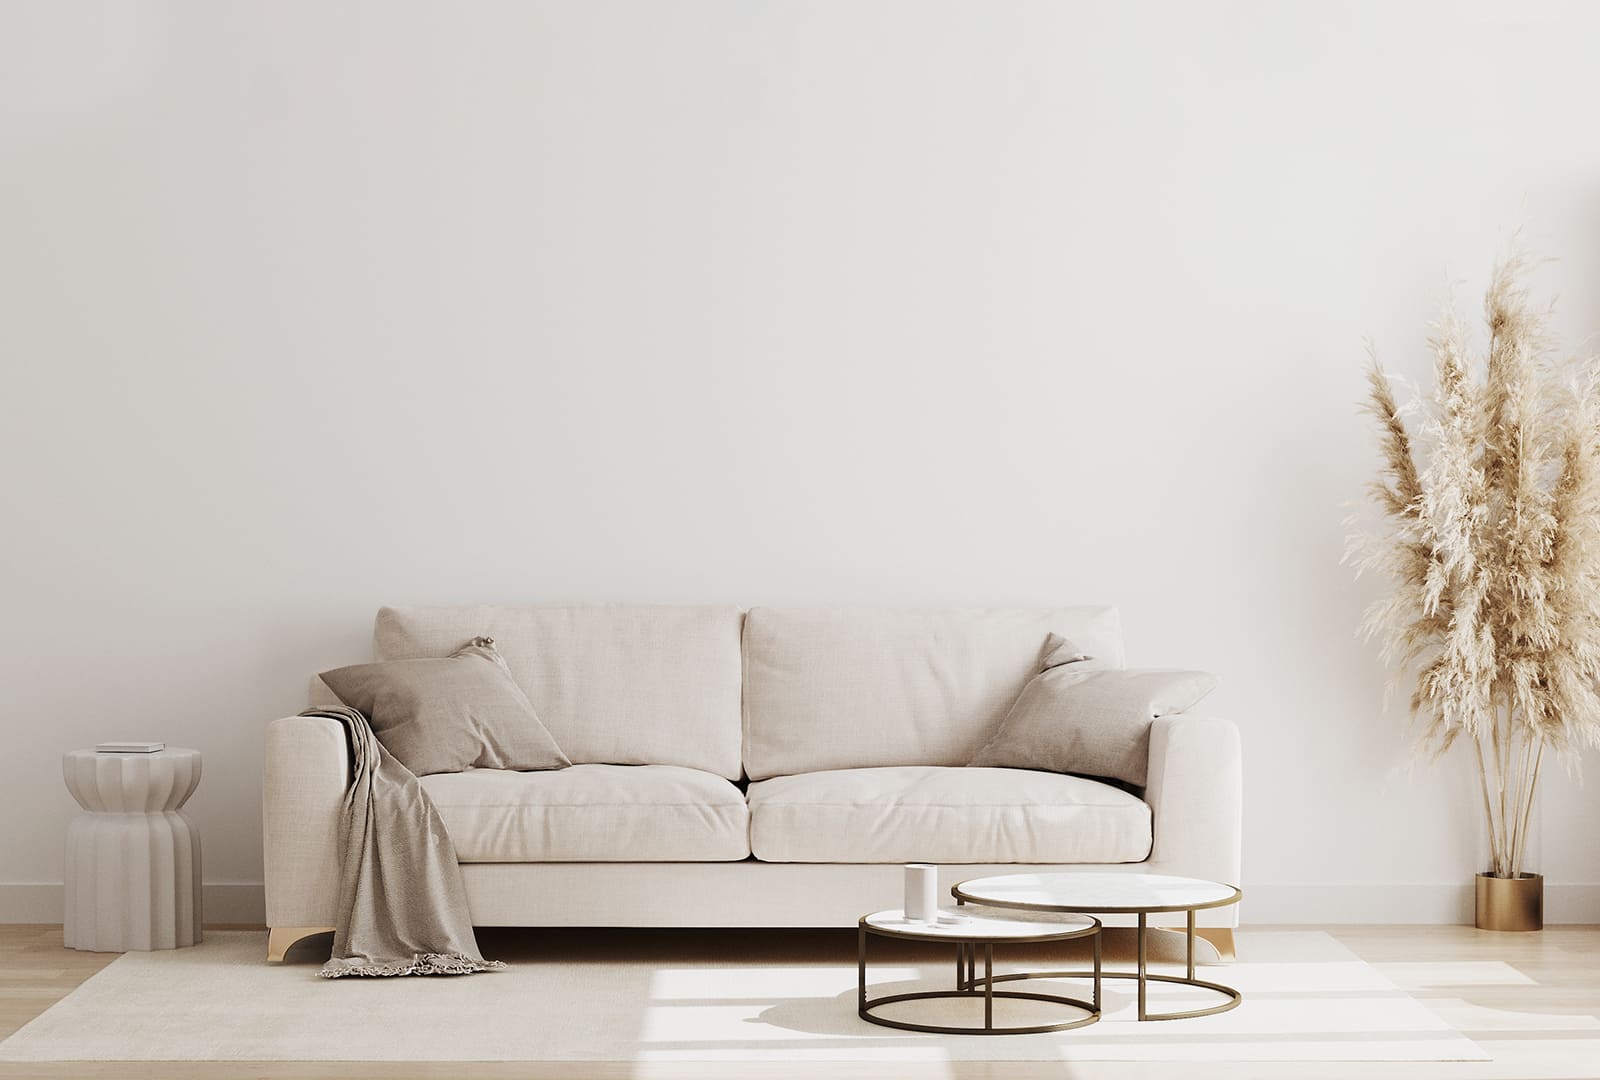 7 Tips For Buying High Quality Furniture